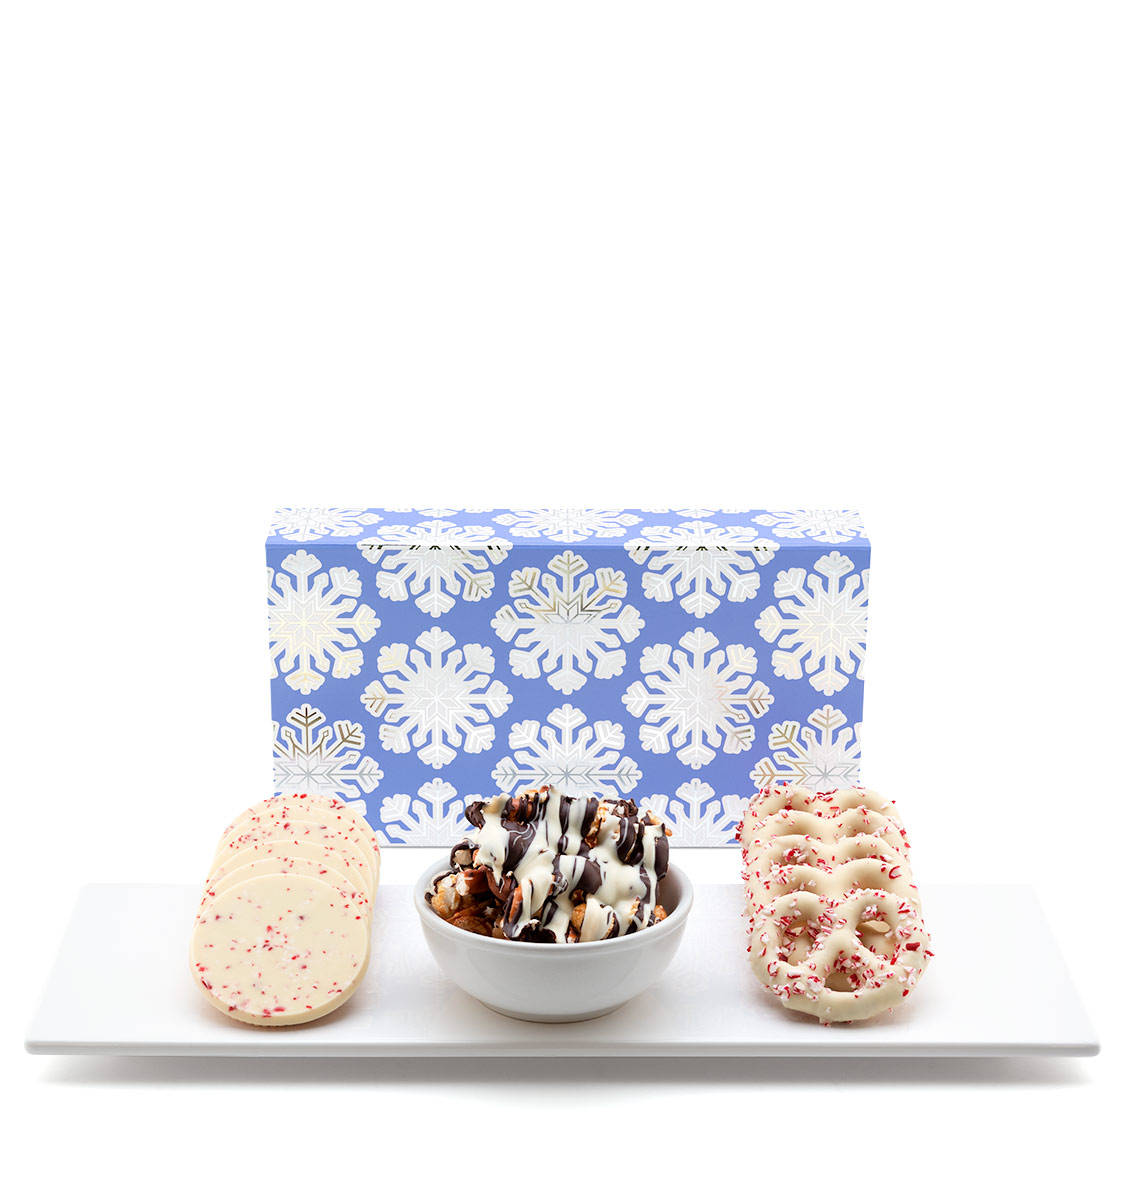 ready-gift-chocolate-SHX230766T-shimmering-snowflake-peppermint-popcorn-pretzels-bark-luxury-tasting-box-featured